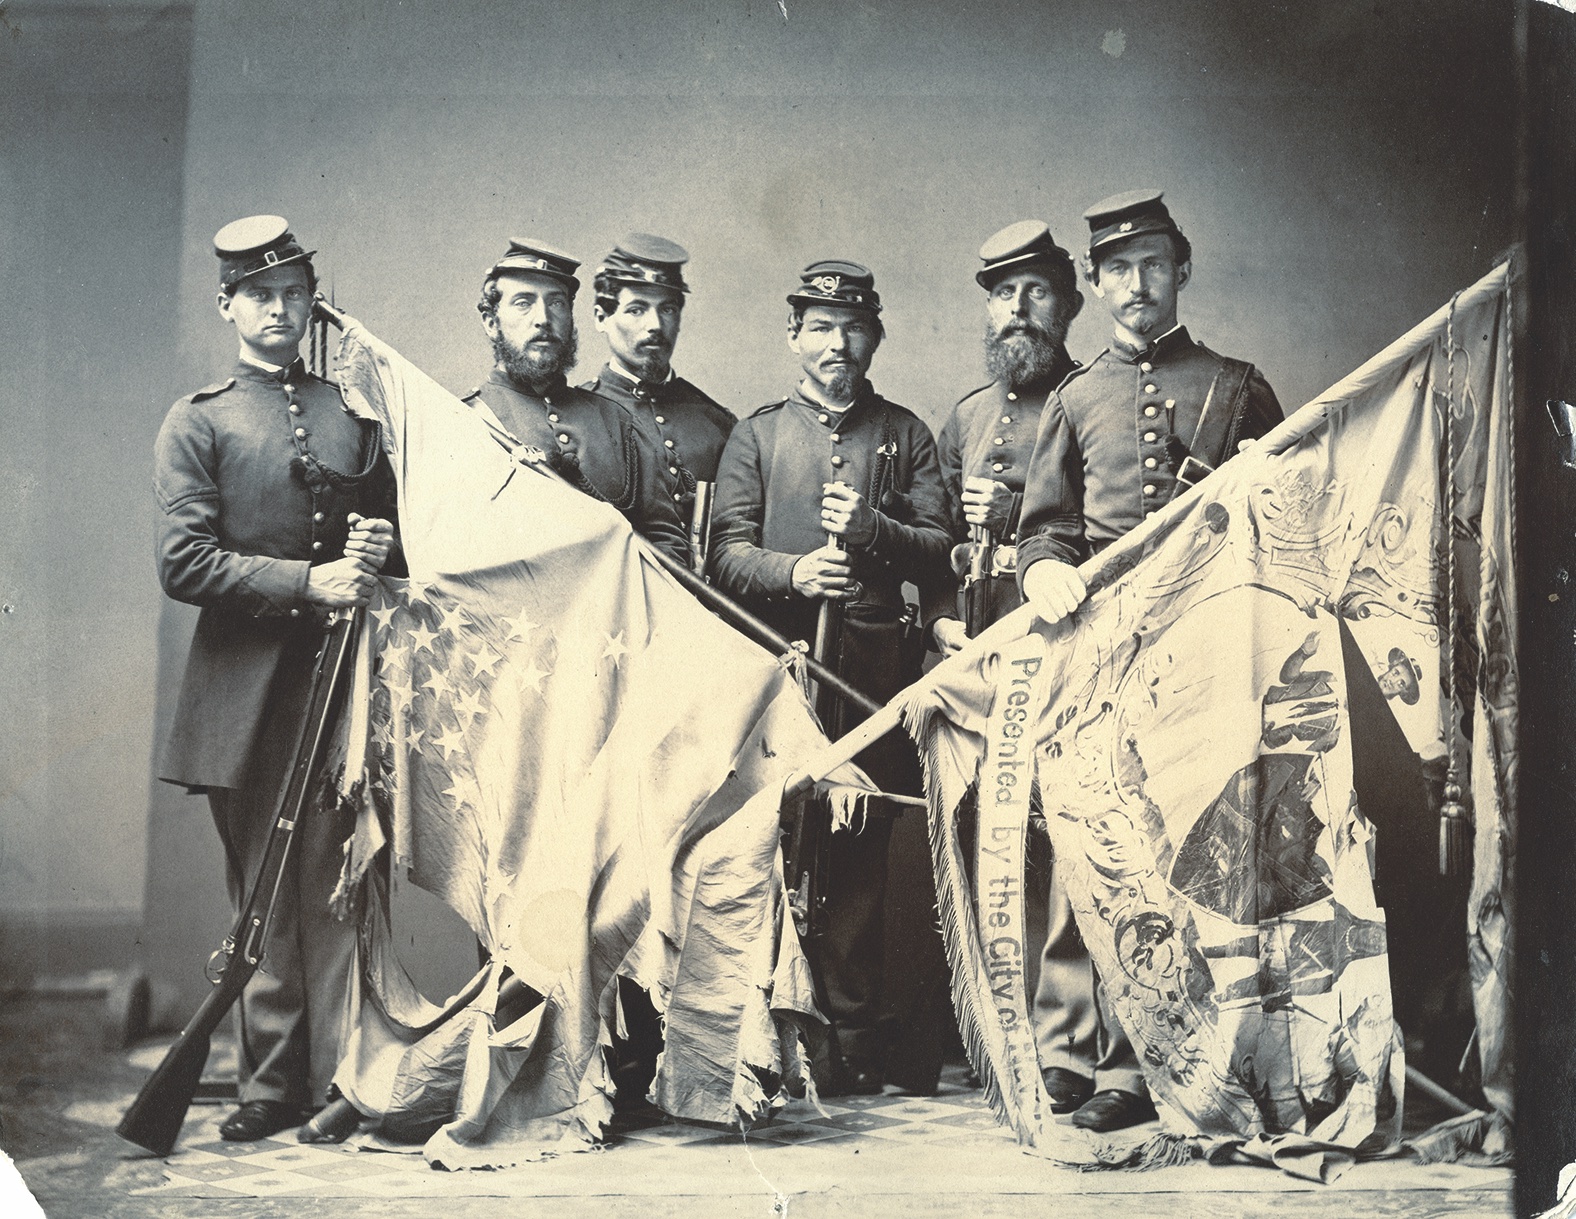 Veterans of the 20th New York color guard with their battle-shredded banners, including the state flag presented by the “City of New York.” The 20th was primarily composed of German immigrants from New York City and New Jersey who belonged to Turnverein, or German gymnastic clubs. Members of such clubs were known as Turners, and the regiment was nicknamed the “Turner Regiment.” The sprightly soldiers put on occasional gymnastic shows in camp. The 20th served from May 1861 to June 1863. Aside from Antietam, the regiment’s other major fight came at the May 1863 Battle of Salem Church during the Chancellorsville Campaign. (The Buffalo History Museum)